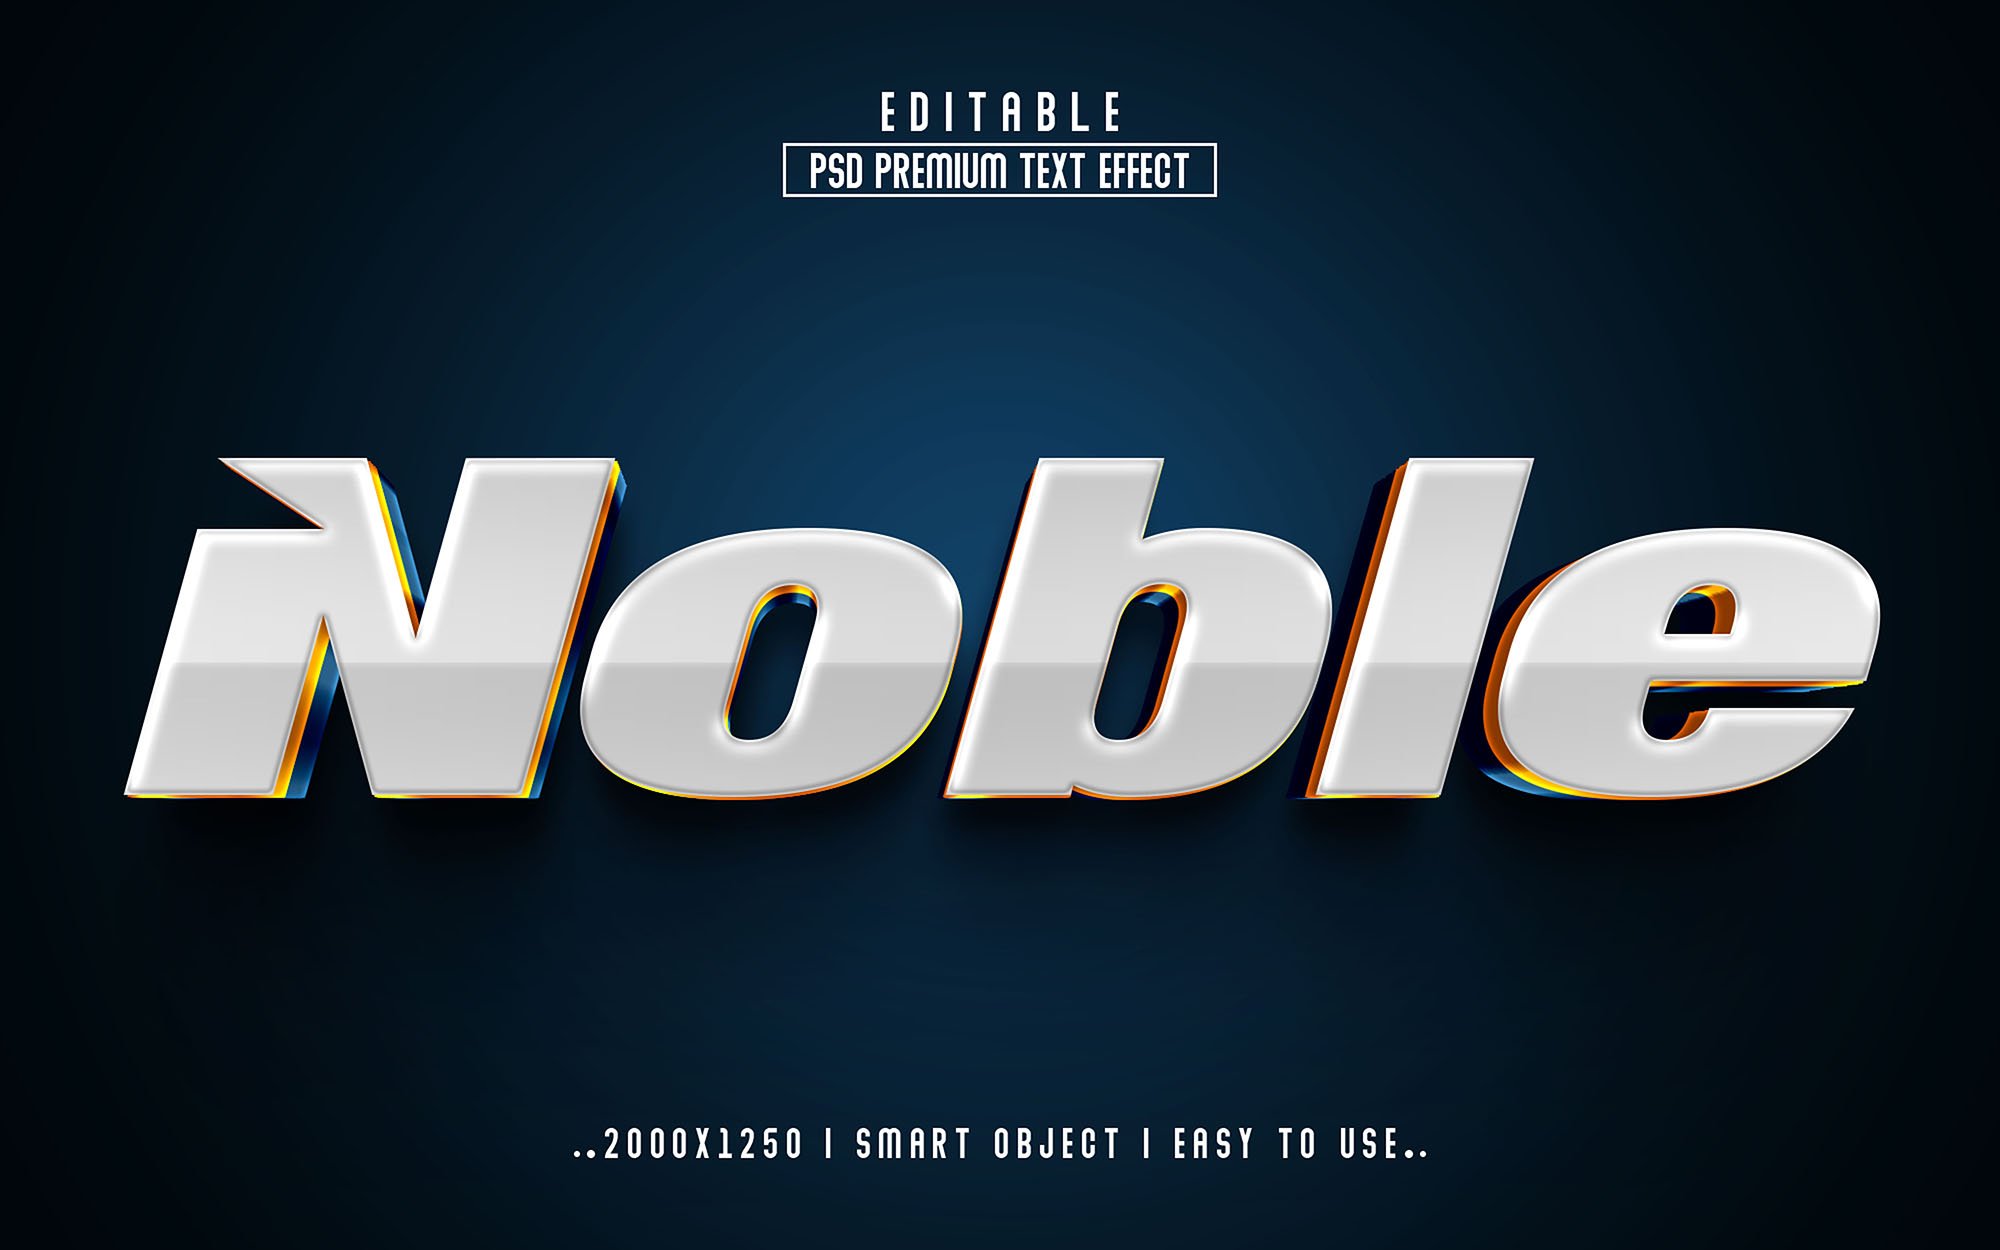 Noble 3D Editable Text Effect effeccover image.